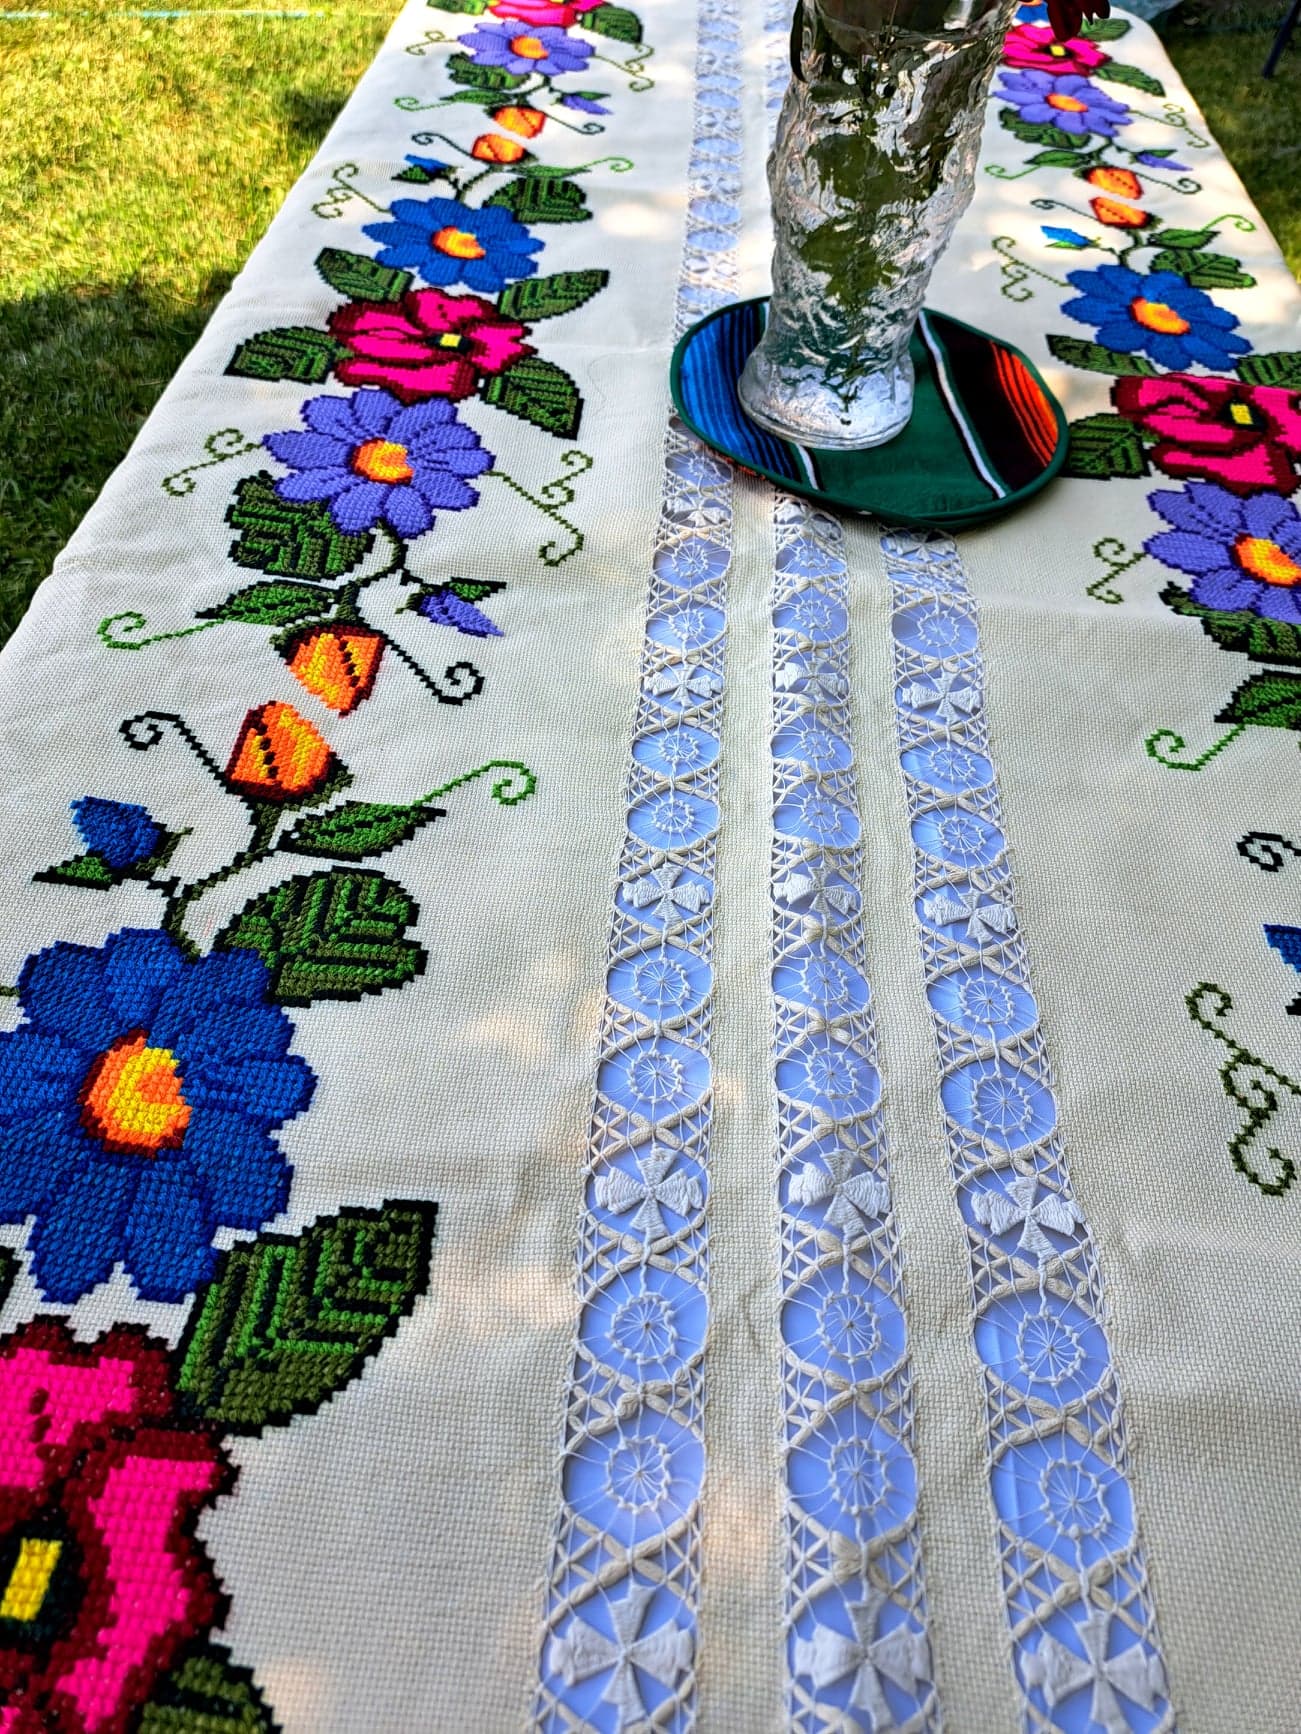 Embroidered Tablecloth with Cross Stitch Flowers